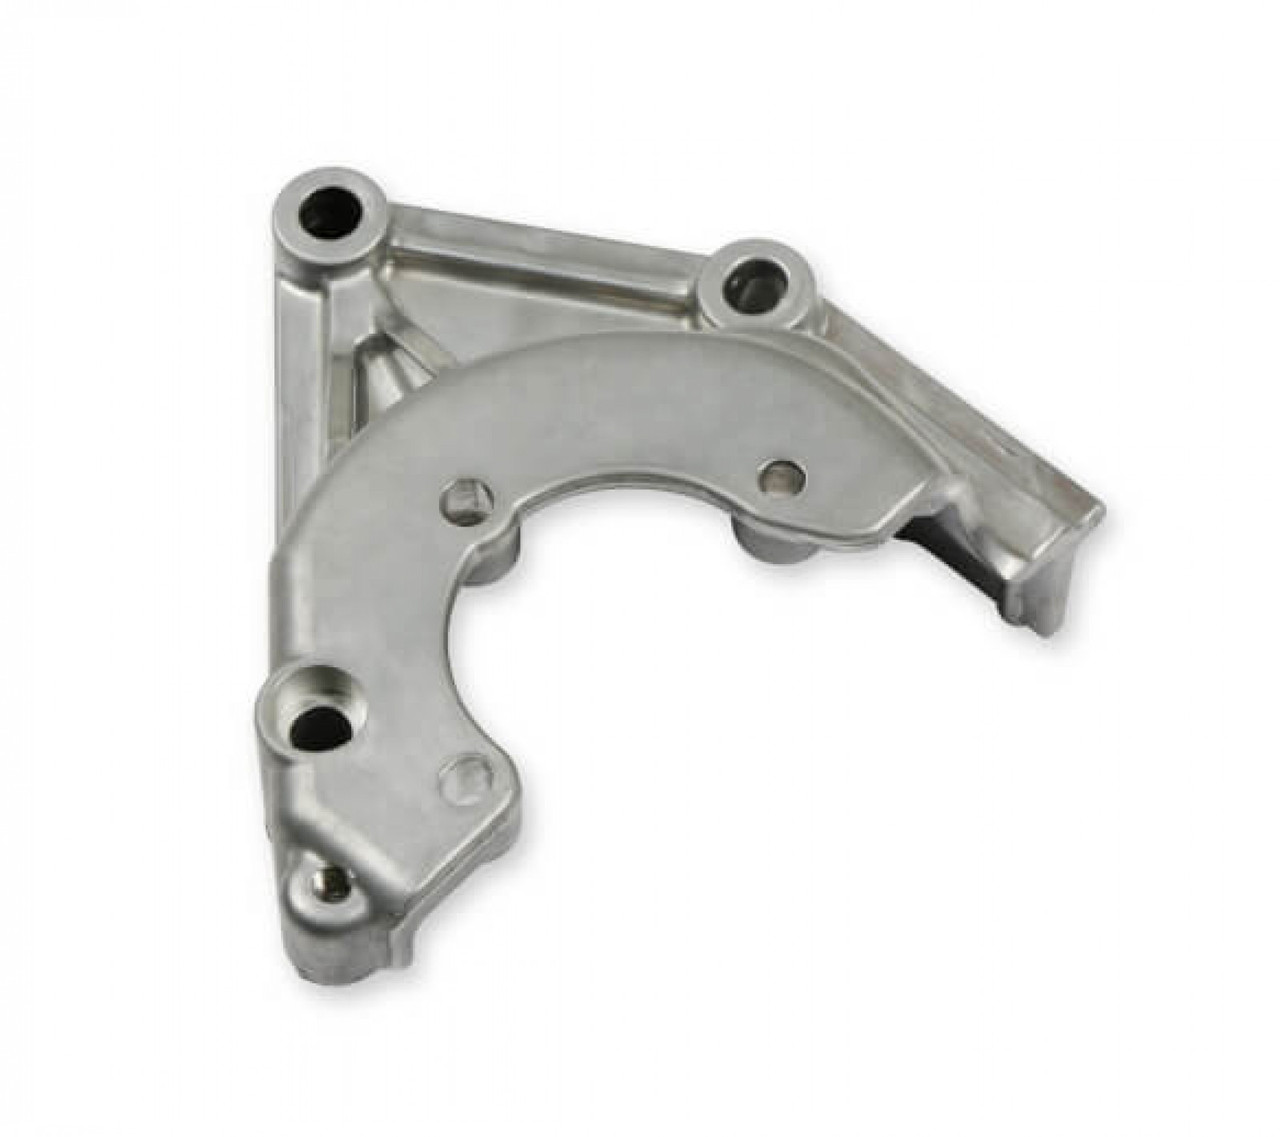 Holley Mid LSA/LS Accessory Drive Bracket Kit - Power Steering - Natural (HOL-120-165)